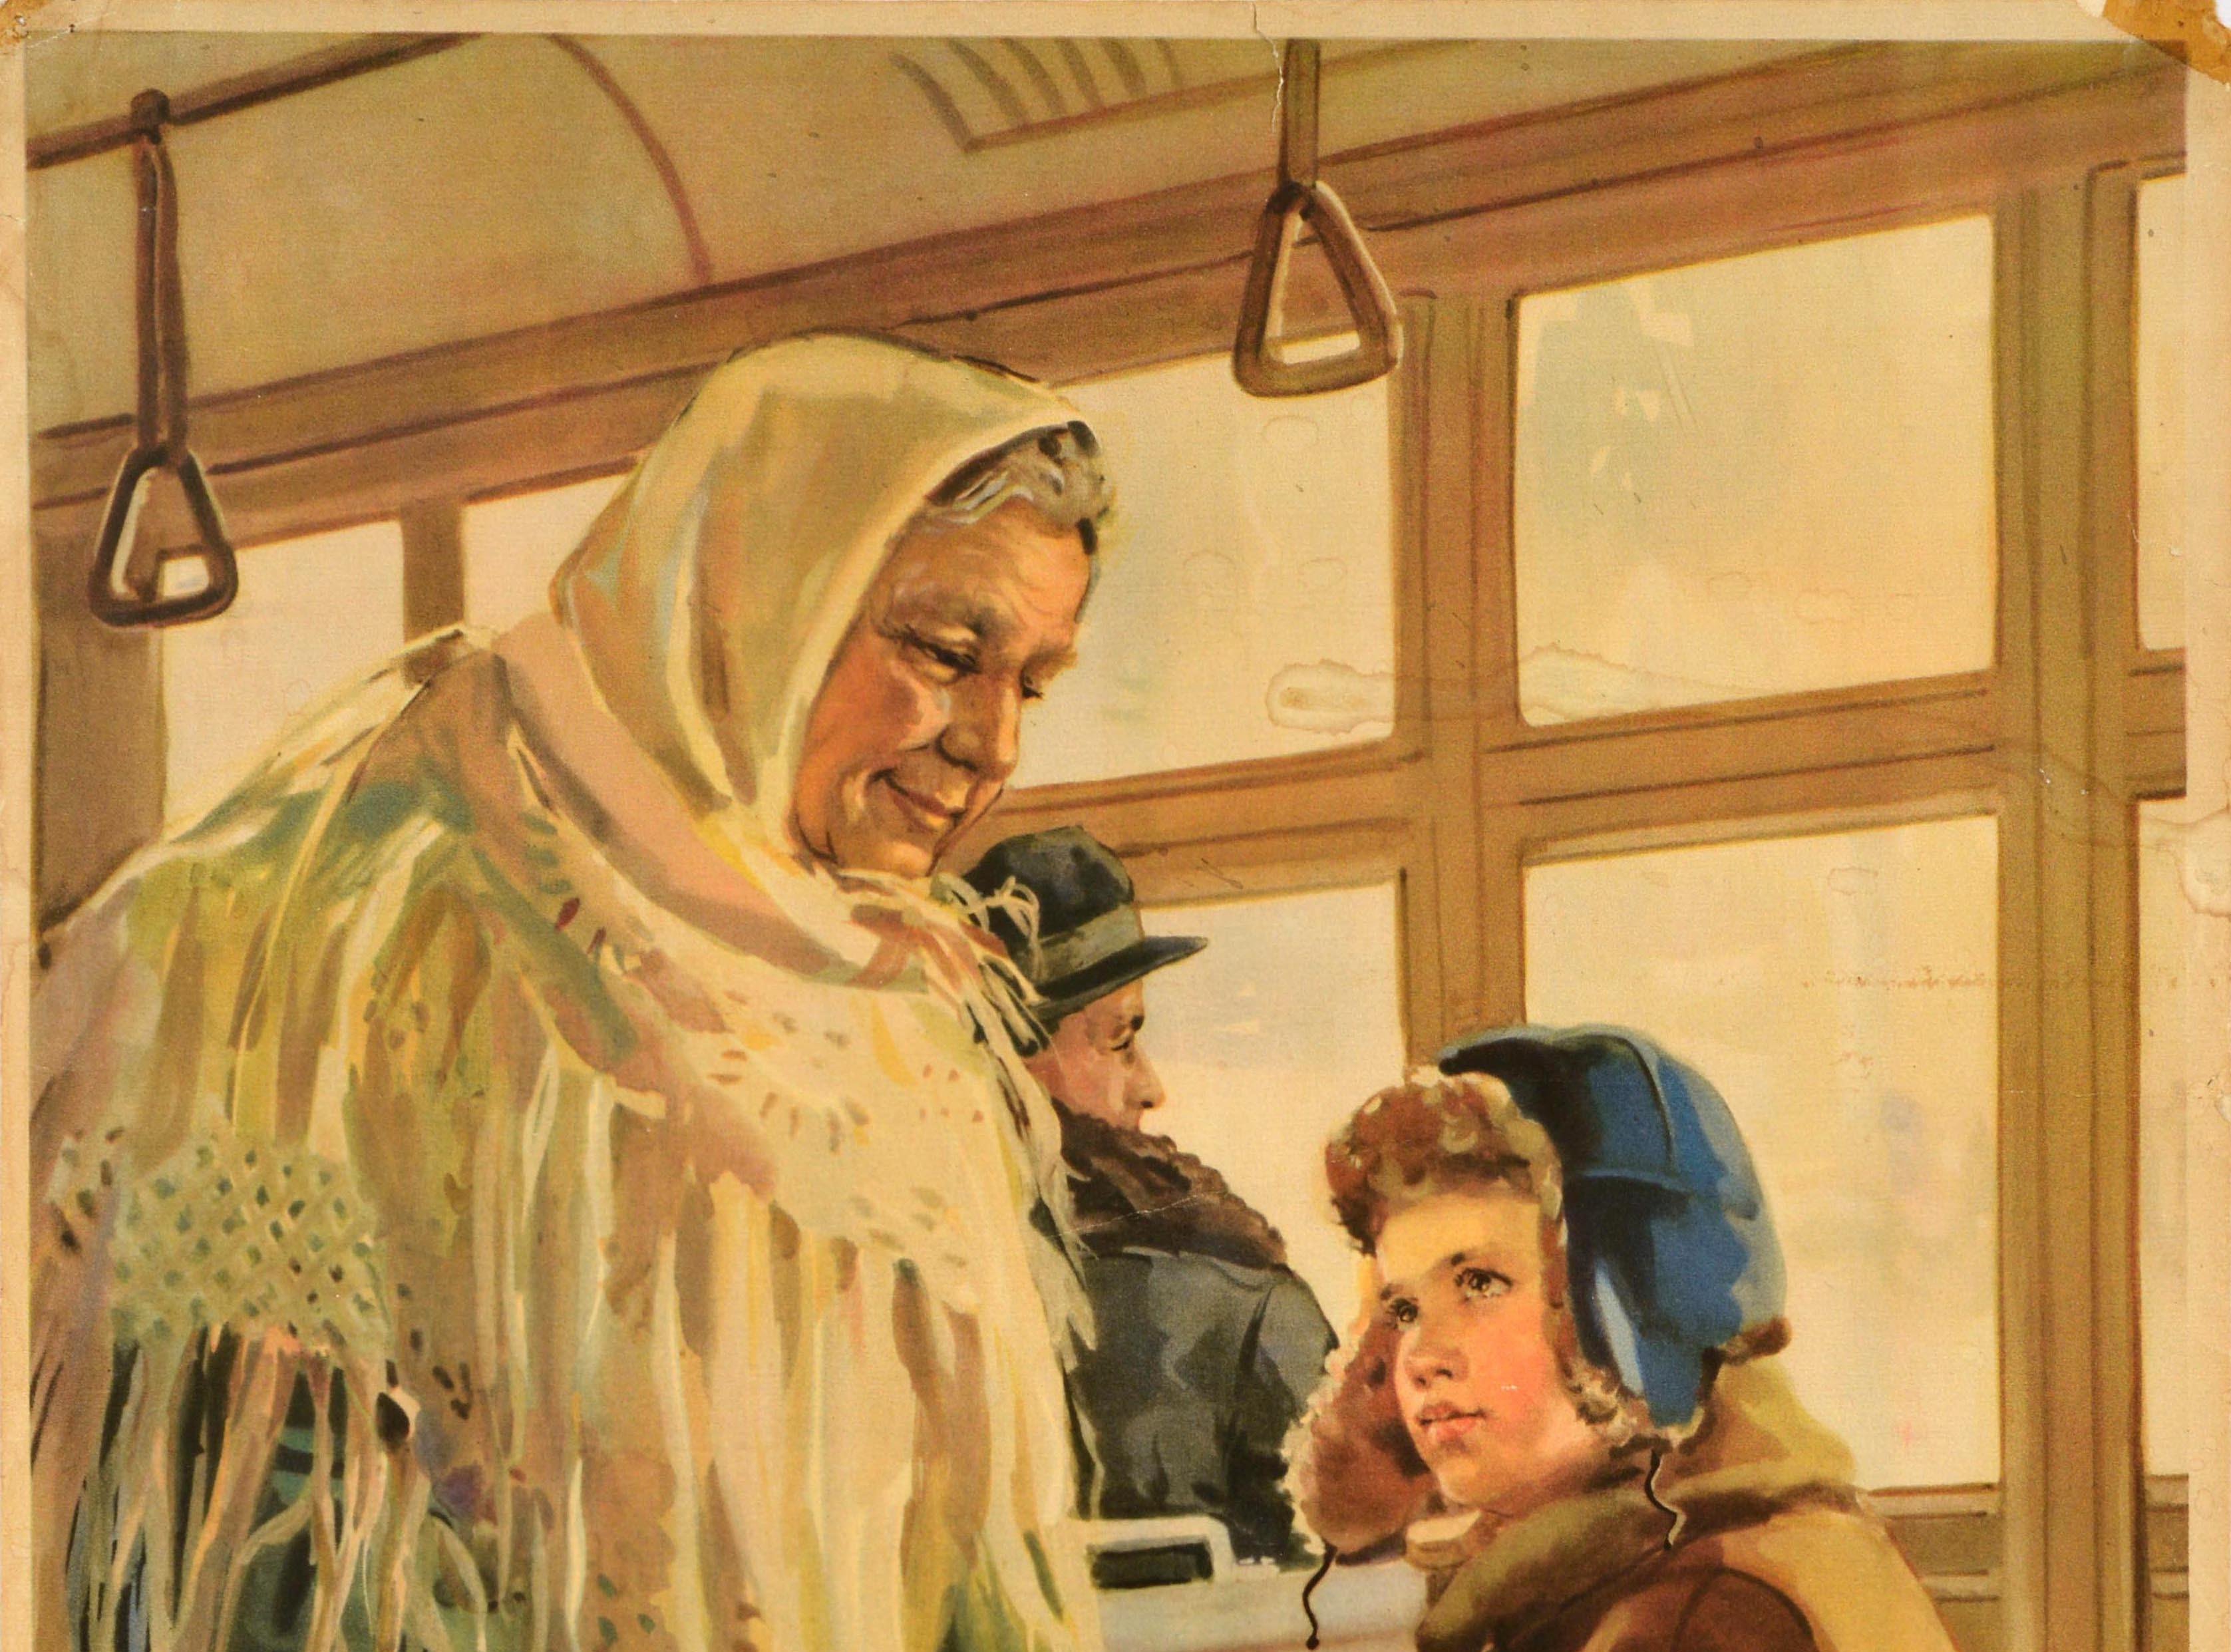 Original vintage Soviet propaganda poster promoting respectful conduct, discipline and good manners - He acted like a pioneer: he gave up a seat to an old lady - featuring an image of a polite young boy in a winter coat, hat and mittens indicating